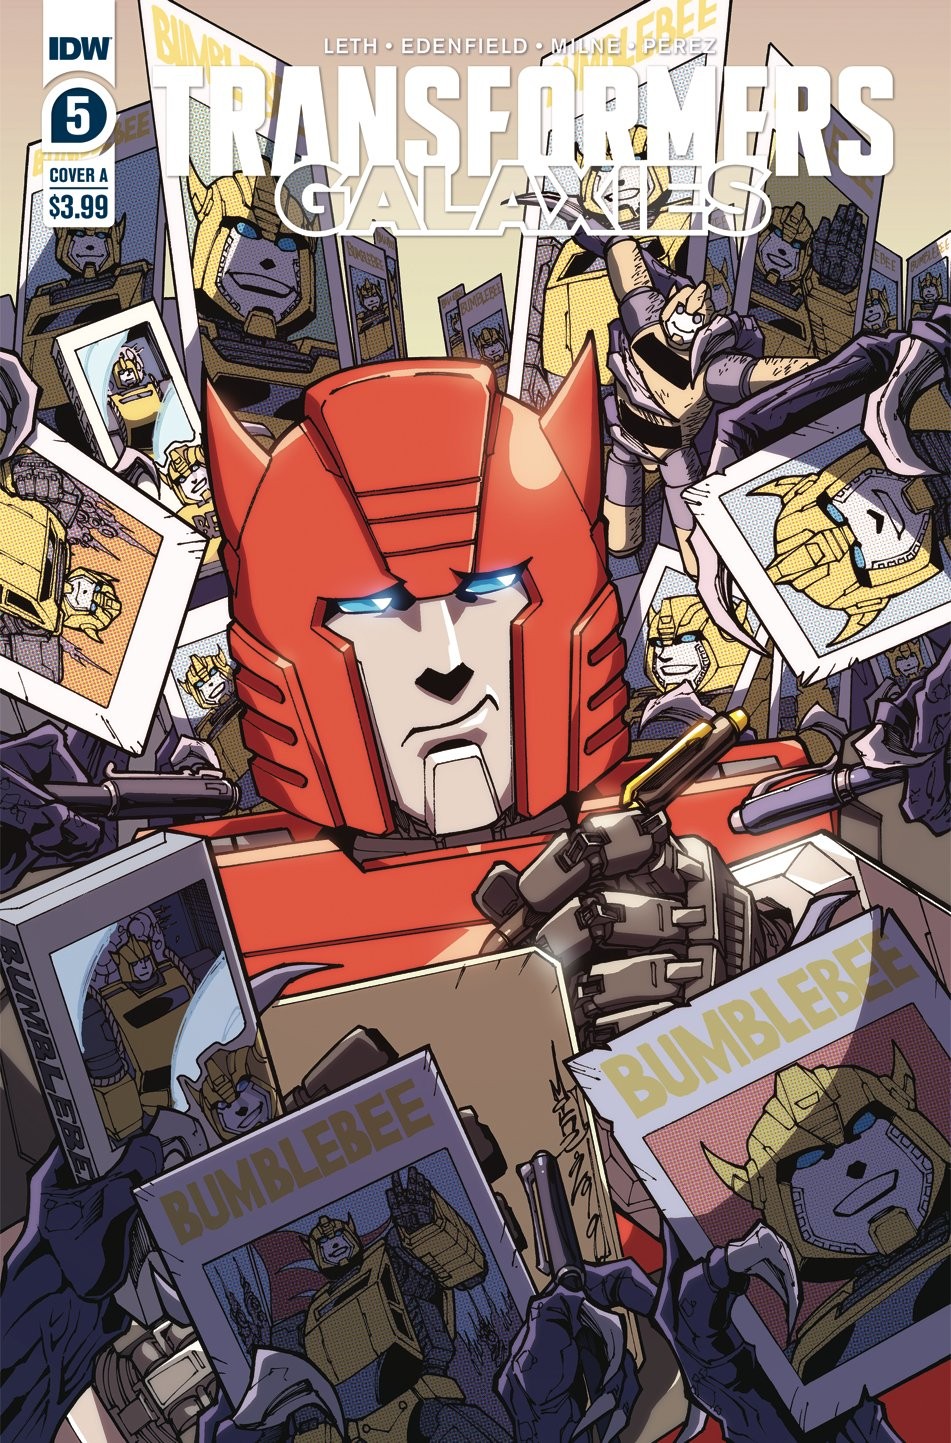 Transformers News: Transformers Galaxies #5 Cover Revealed Complete with Process of Production